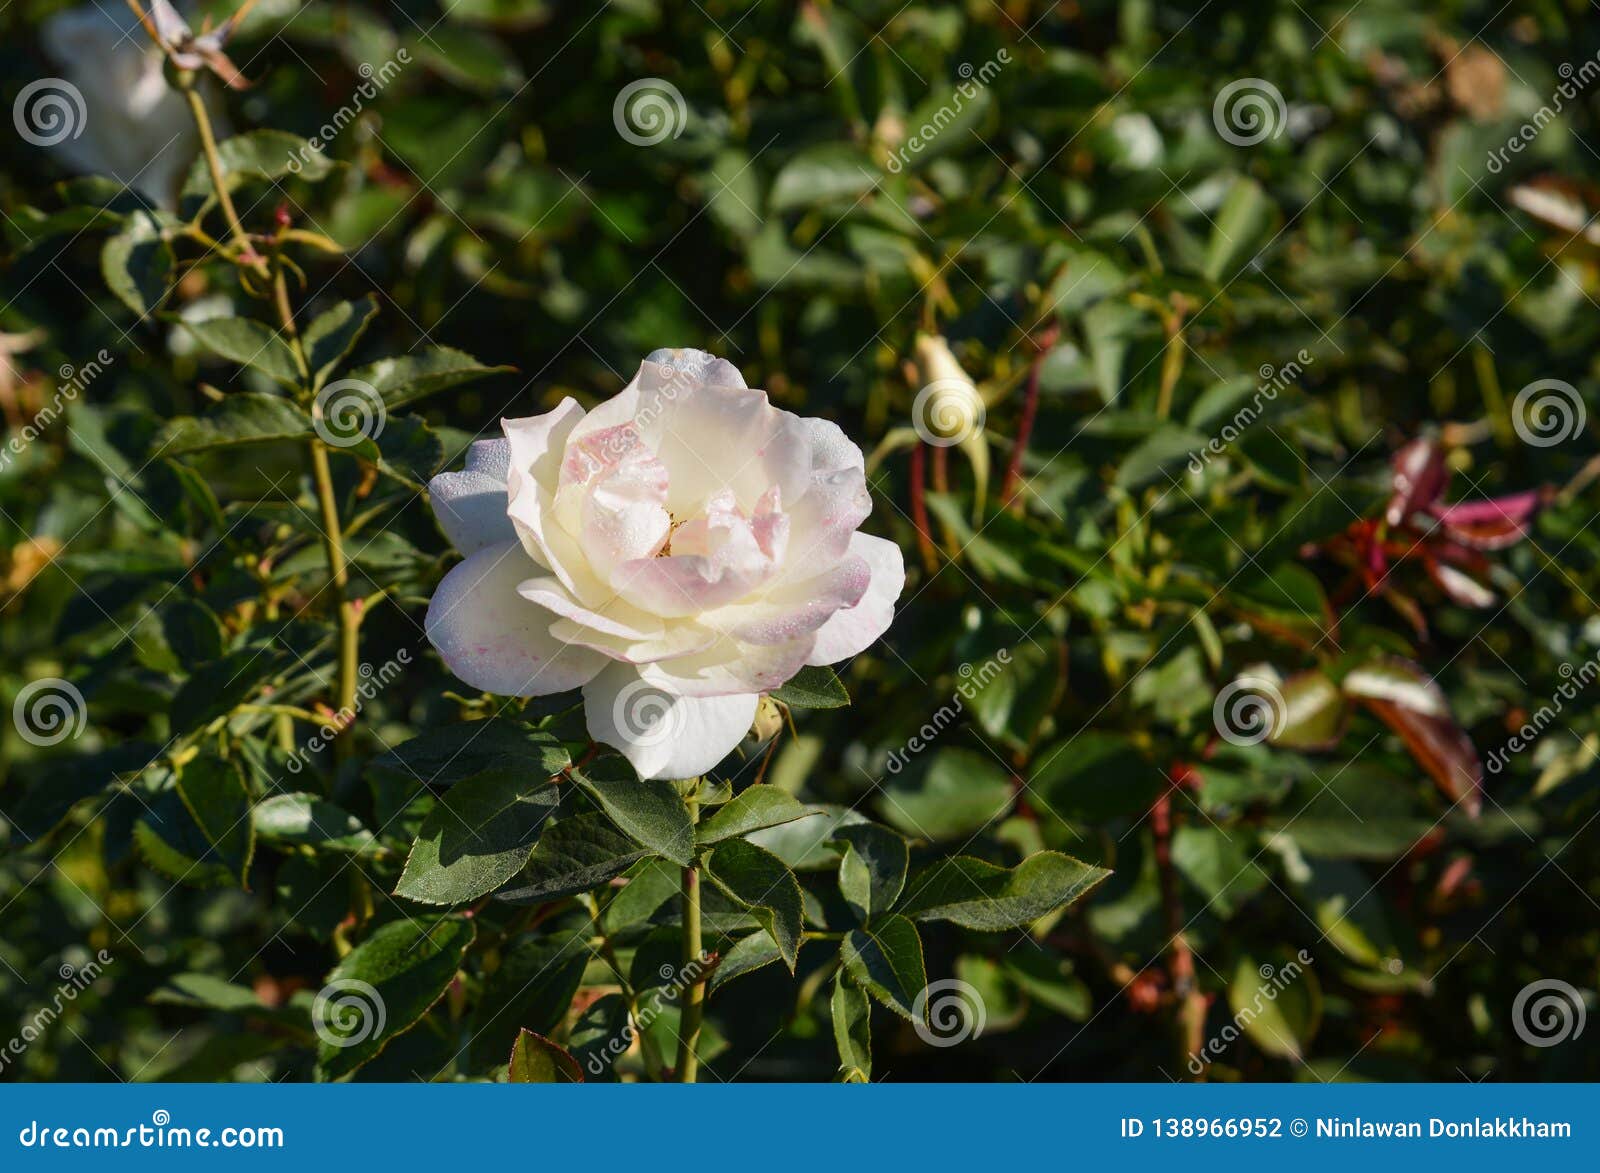 A White Rose Blooming At Garden Stock Photo Image Of Petal Bloom